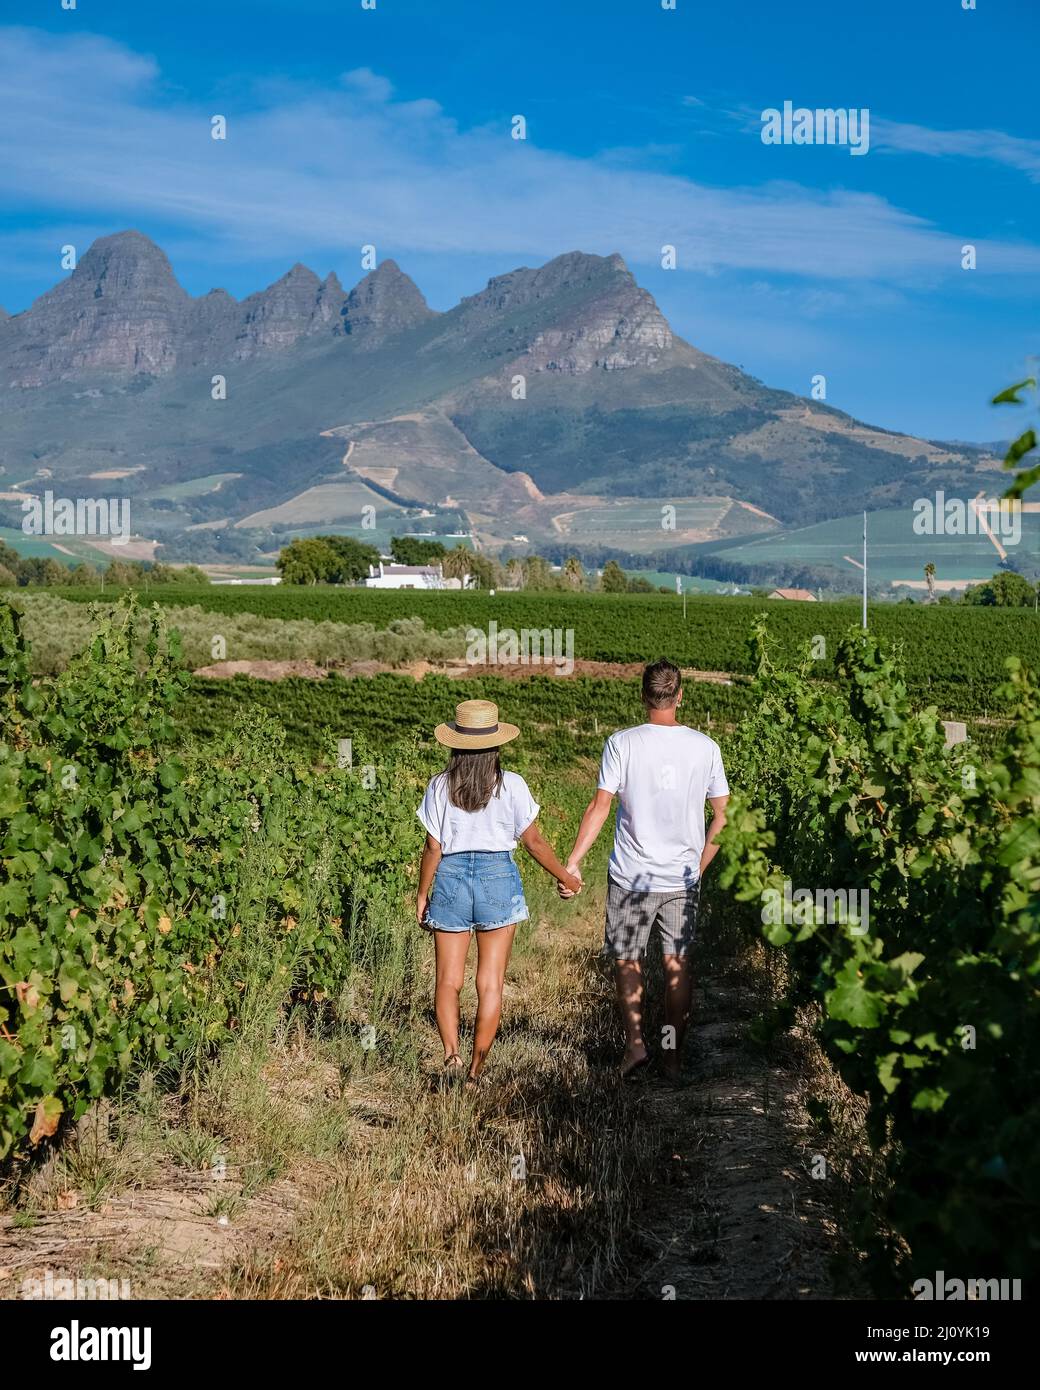 Vineyard landscape at sunset with mountains in Stellenbosch, near Cape Town, South Africa Stock Photo